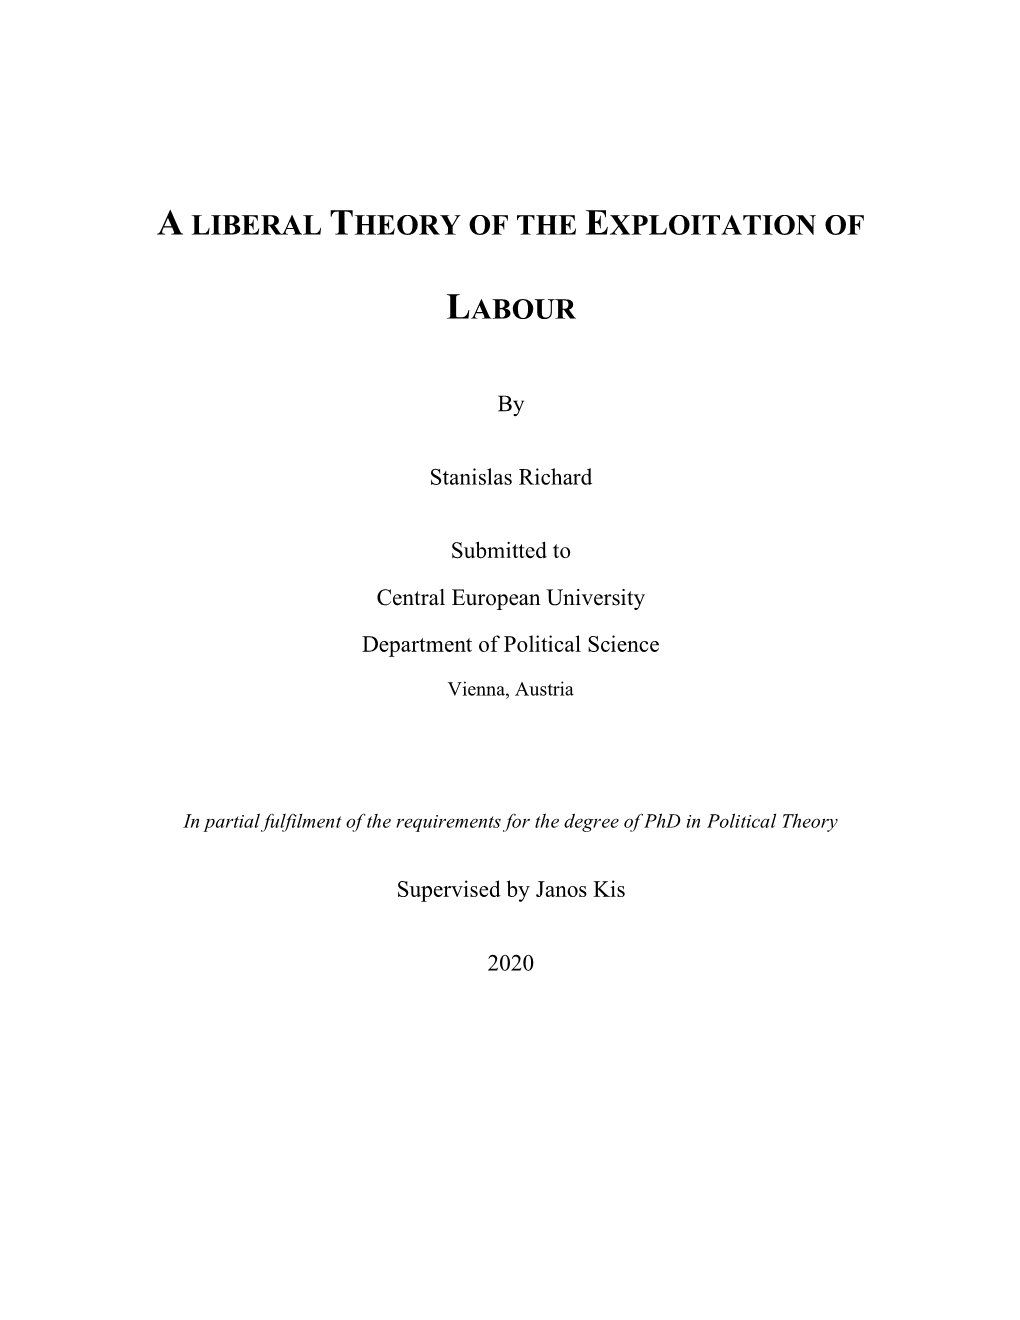 A Liberal Theory of the Exploitation of Labour